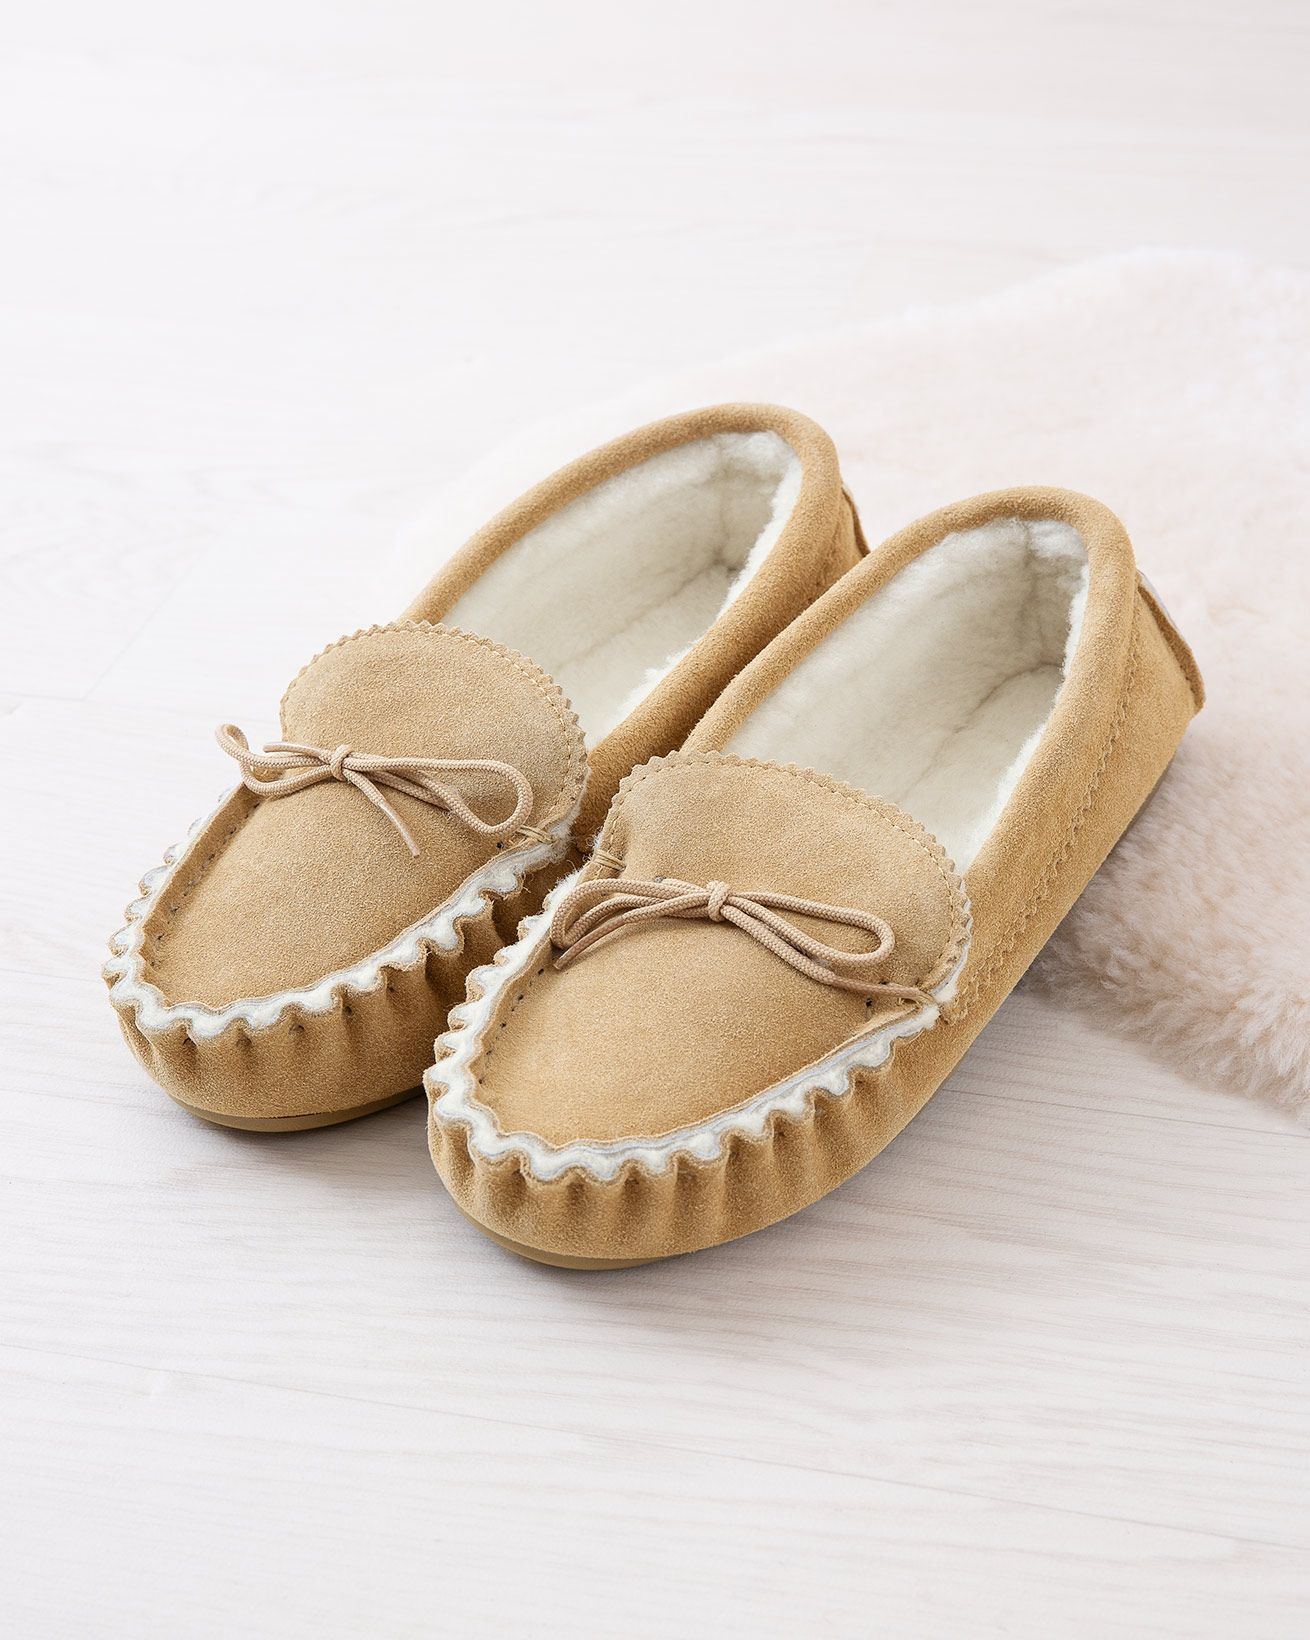 Baby Loafers |Soft Soled Leather Shoes| Moccasins Loafers moccs Baby shoes Brown Loafer Booties Trendy Baby Shoes Modern Baby Shoes